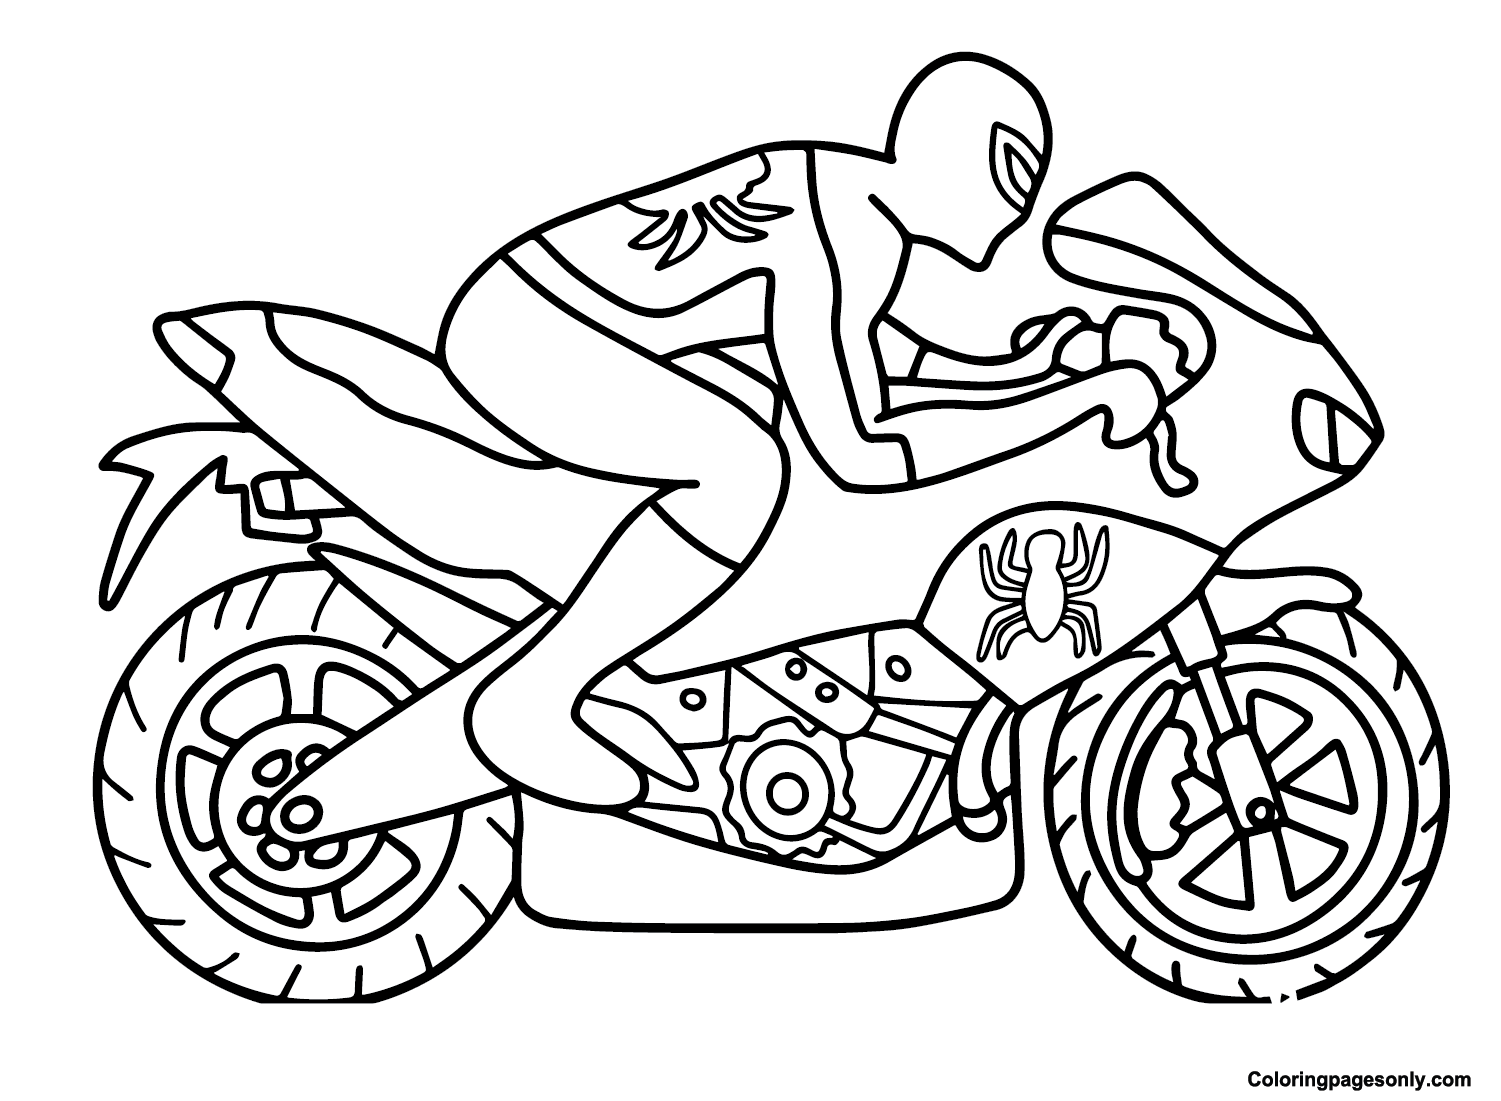 Spidey Motorcycle Coloring Page - Free Printable Coloring Pages